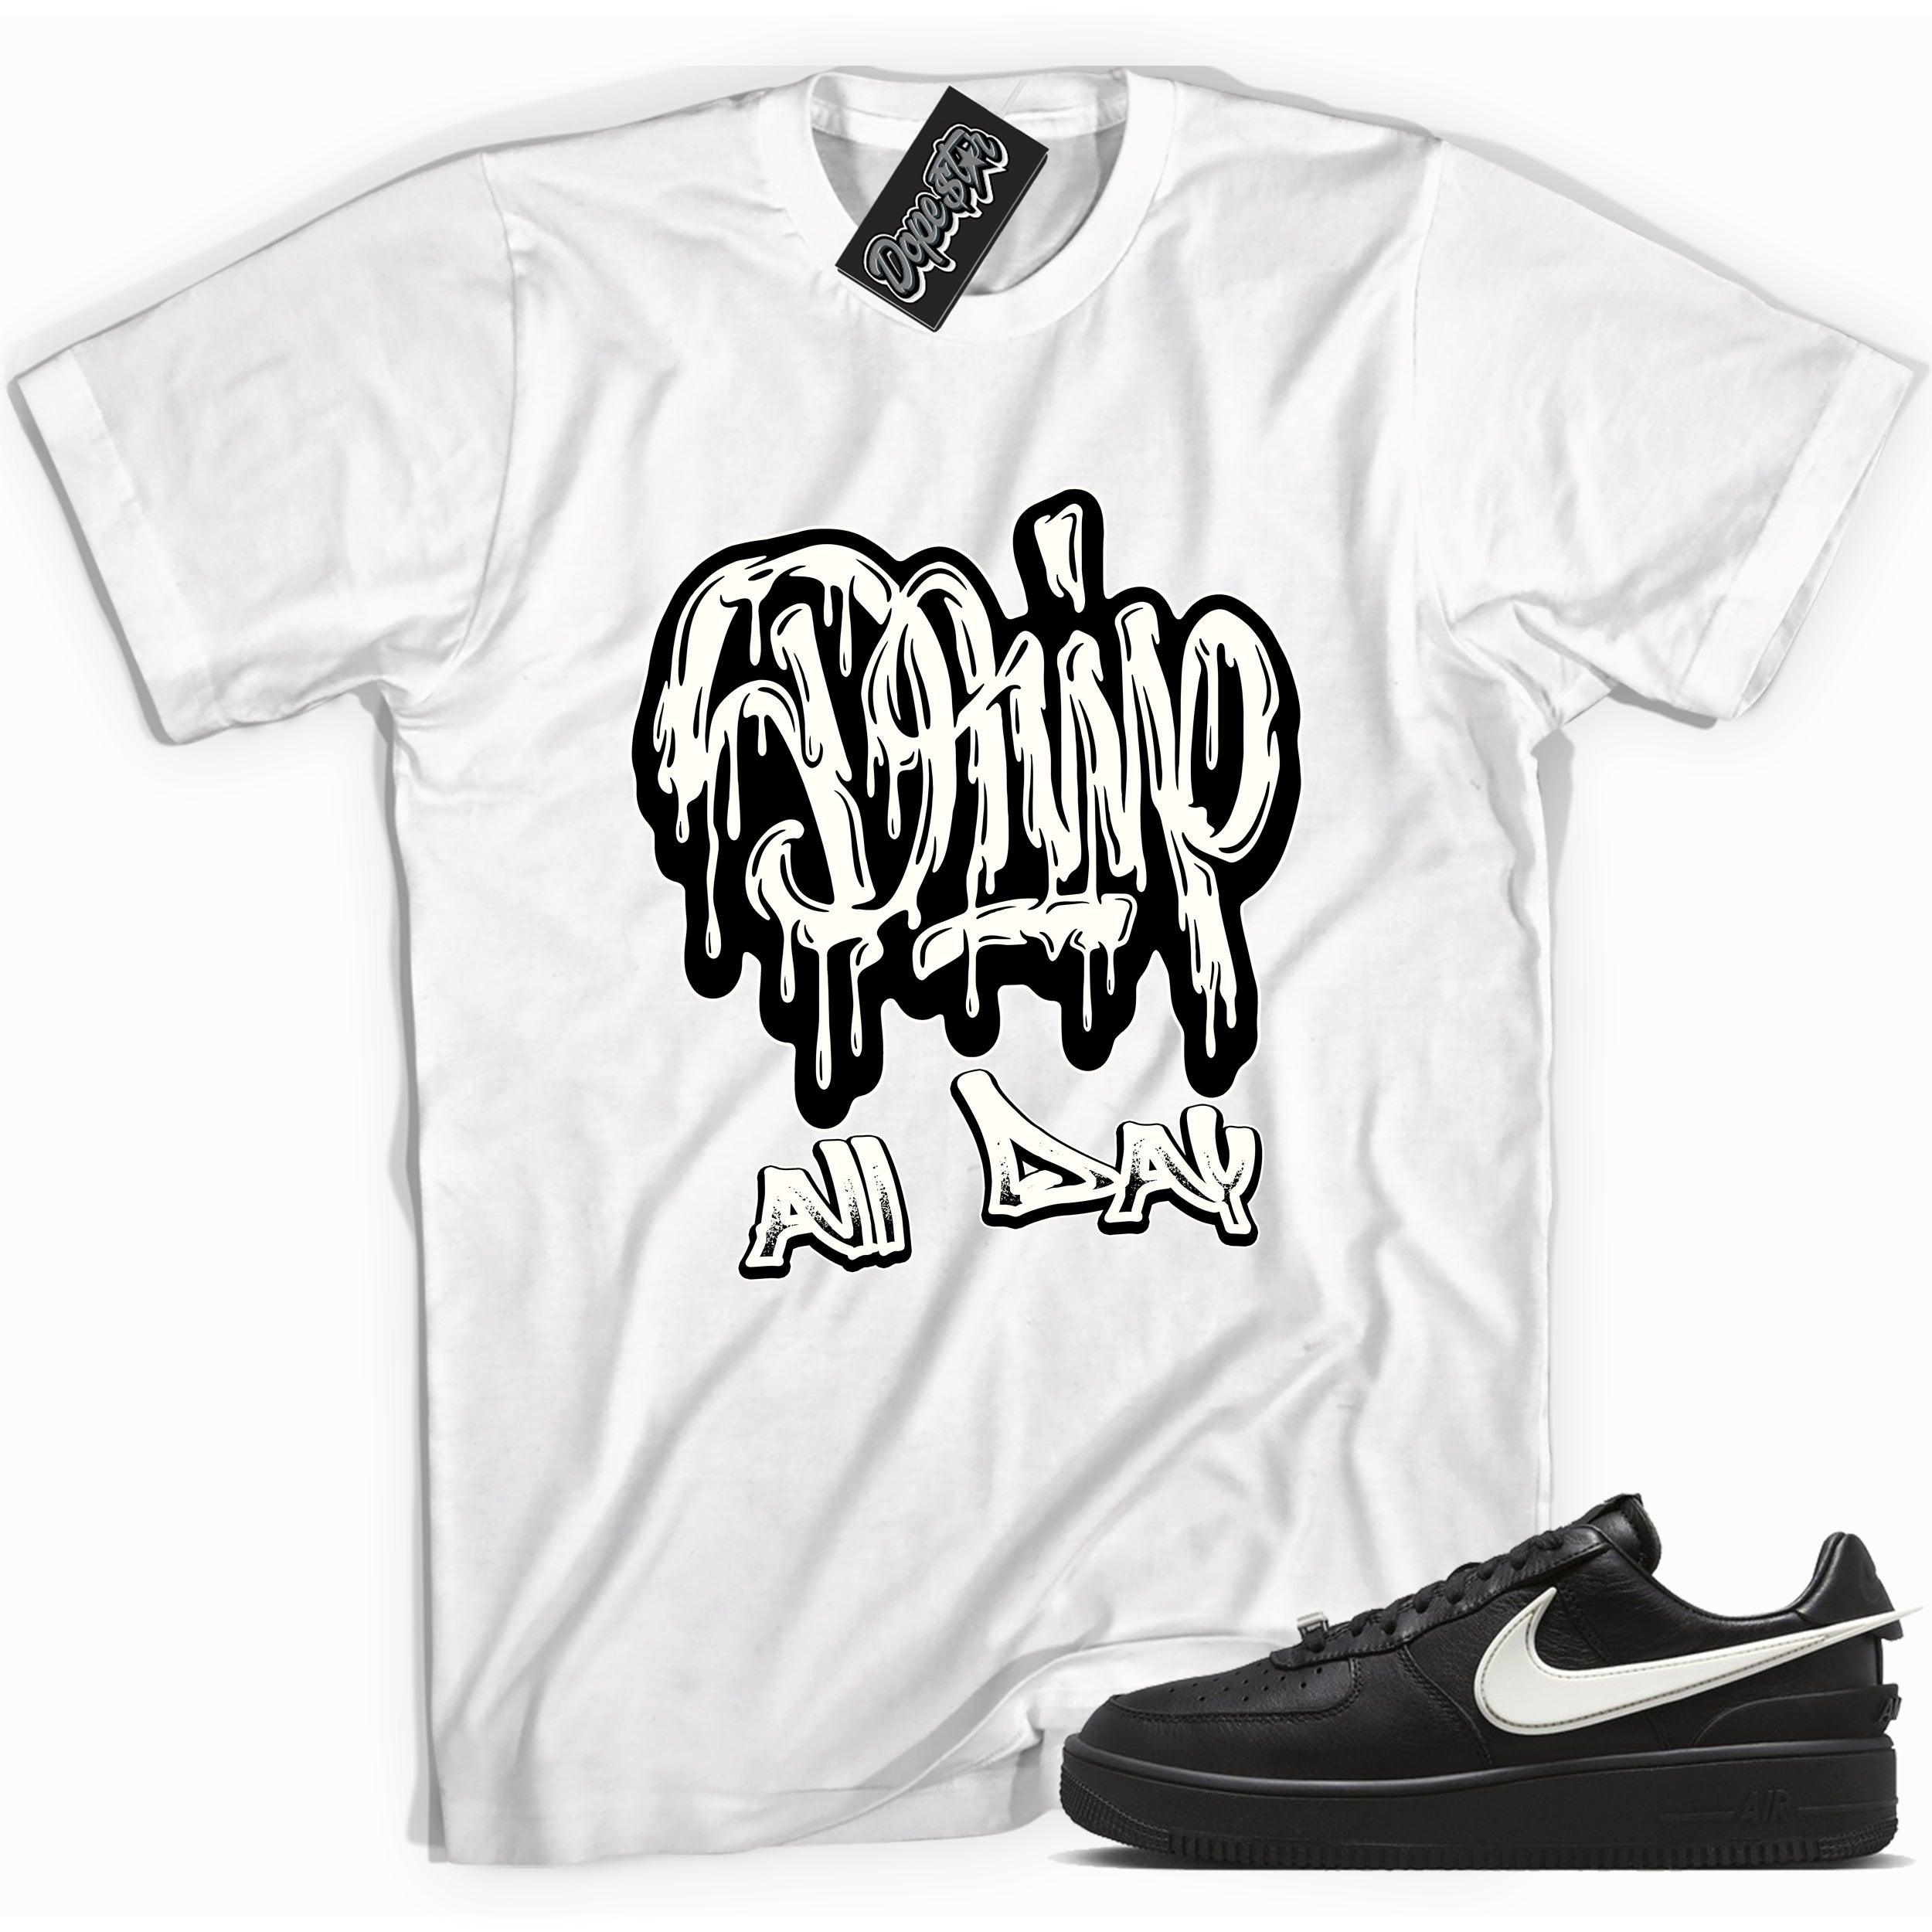 Cool white graphic tee with 'drip all day' print, that perfectly matches Nike Air Force 1 Low Ambush Phantom Black sneakers